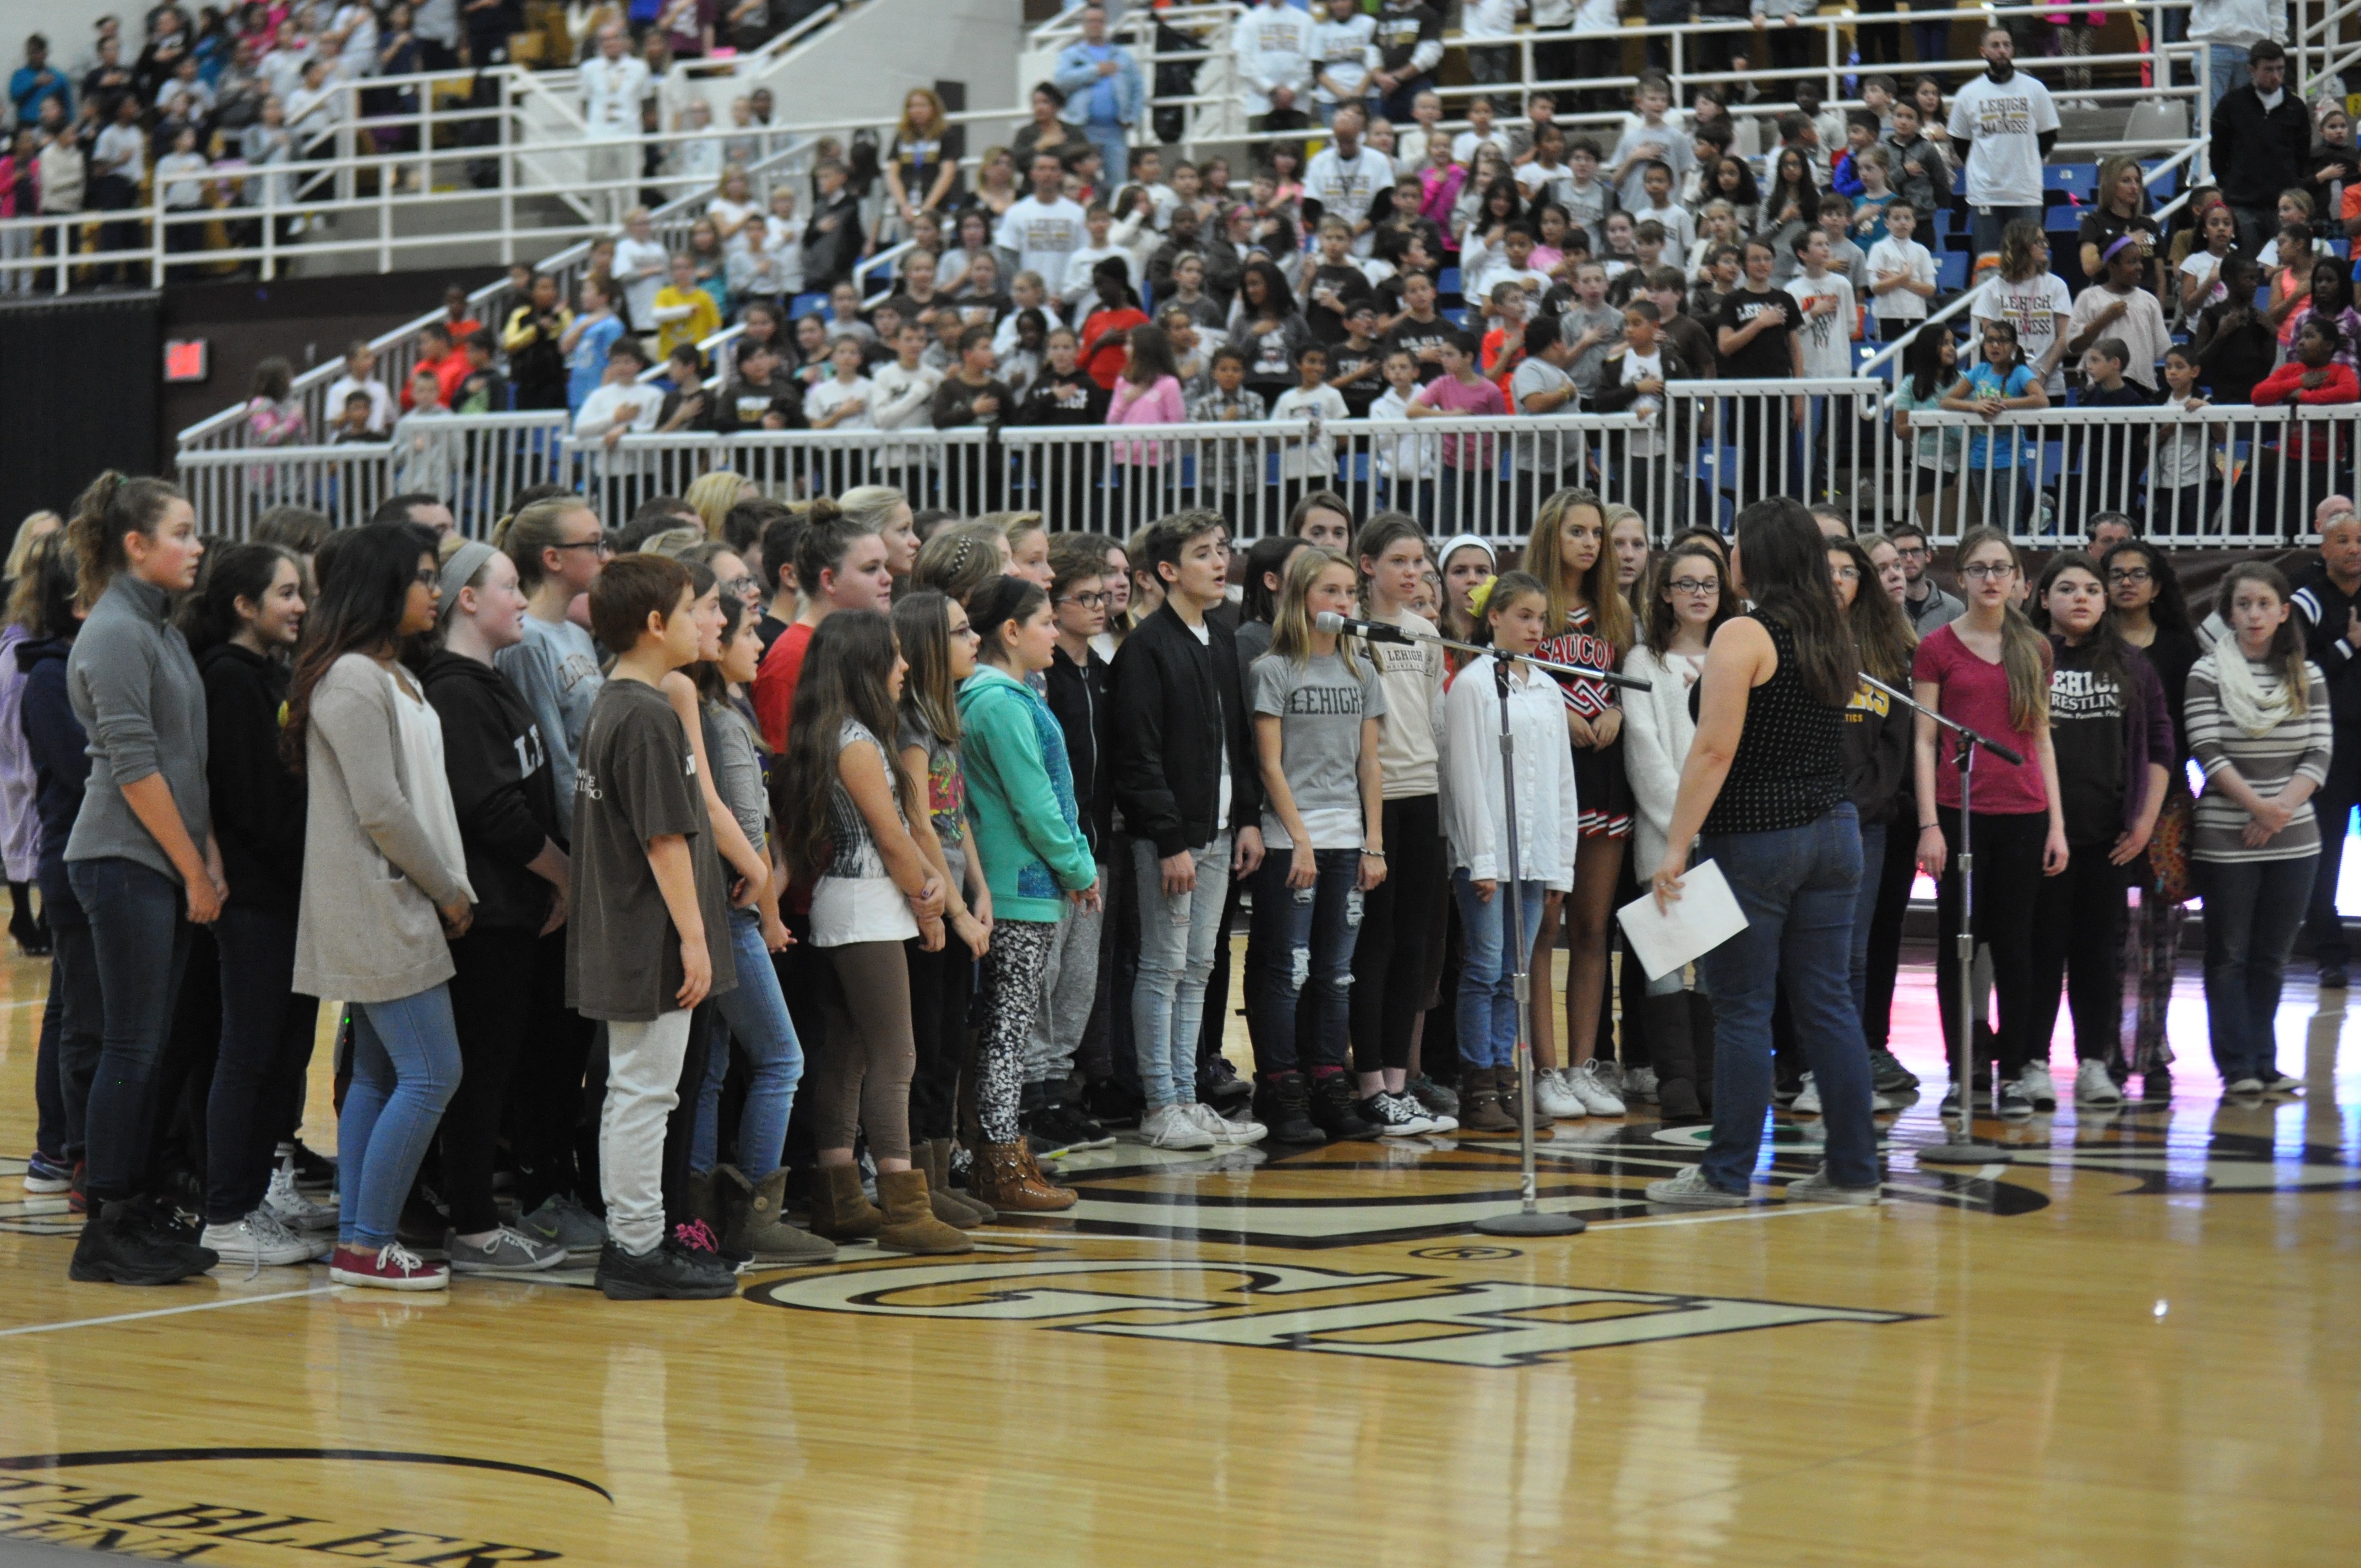 From center-court the SVMS chorus sang the national anthem.